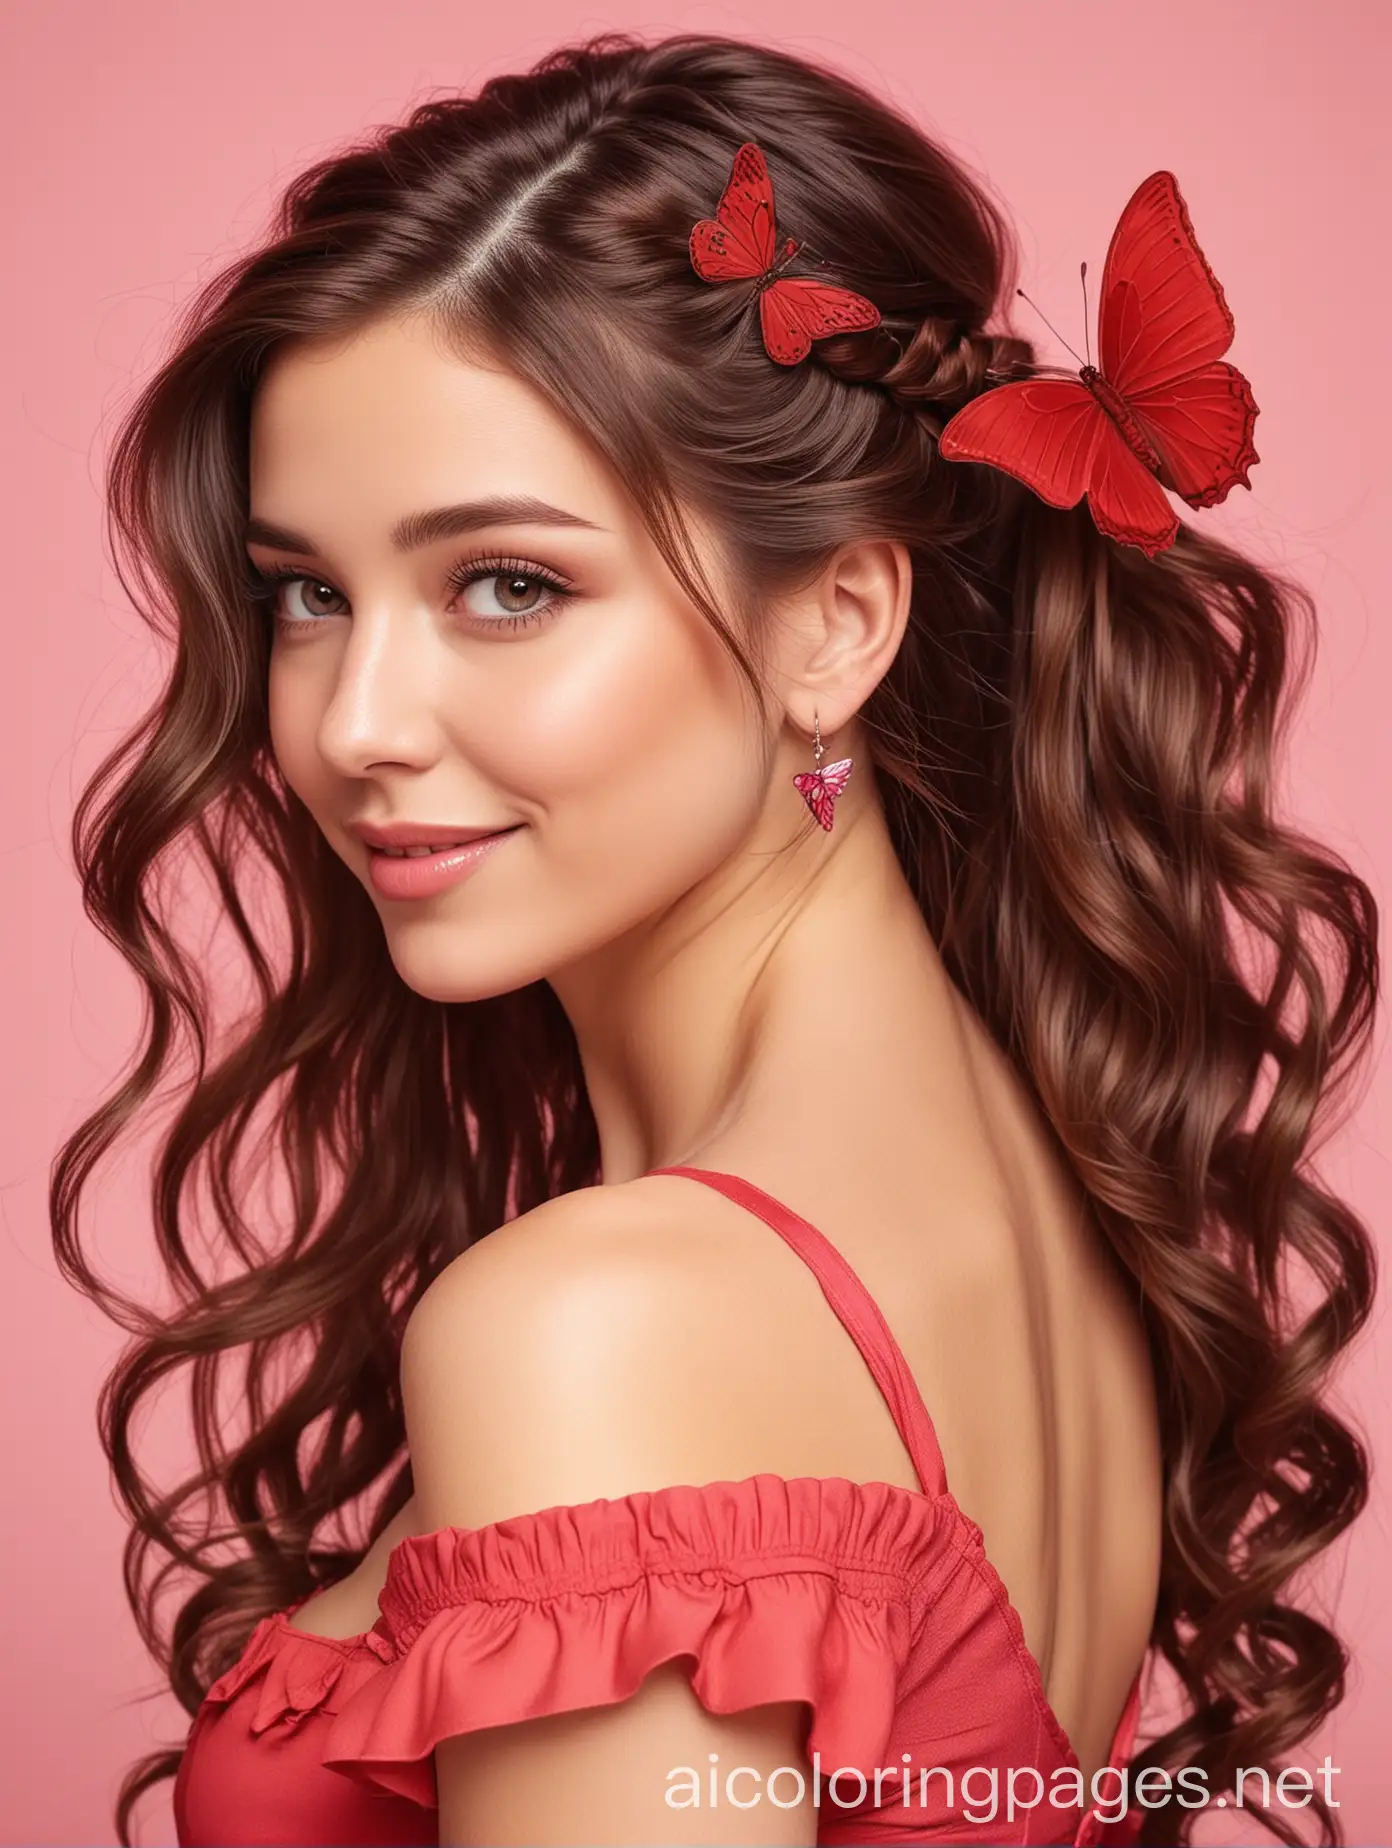 a young woman with long brown hair and red eyes. She is wearing a red dress with a sweetheart neckline and butterfly earrings. Her hair is styled in a fishtail braid with red butterfly hair clips. She has a soft smile on her face and is looking at the viewer over her shoulder. The background is a soft, out-of-focus pink., Coloring Page, black and white, line art, white background, Simplicity, Ample White Space. The background of the coloring page is plain white to make it easy for young children to color within the lines. The outlines of all the subjects are easy to distinguish, making it simple for kids to color without too much difficulty